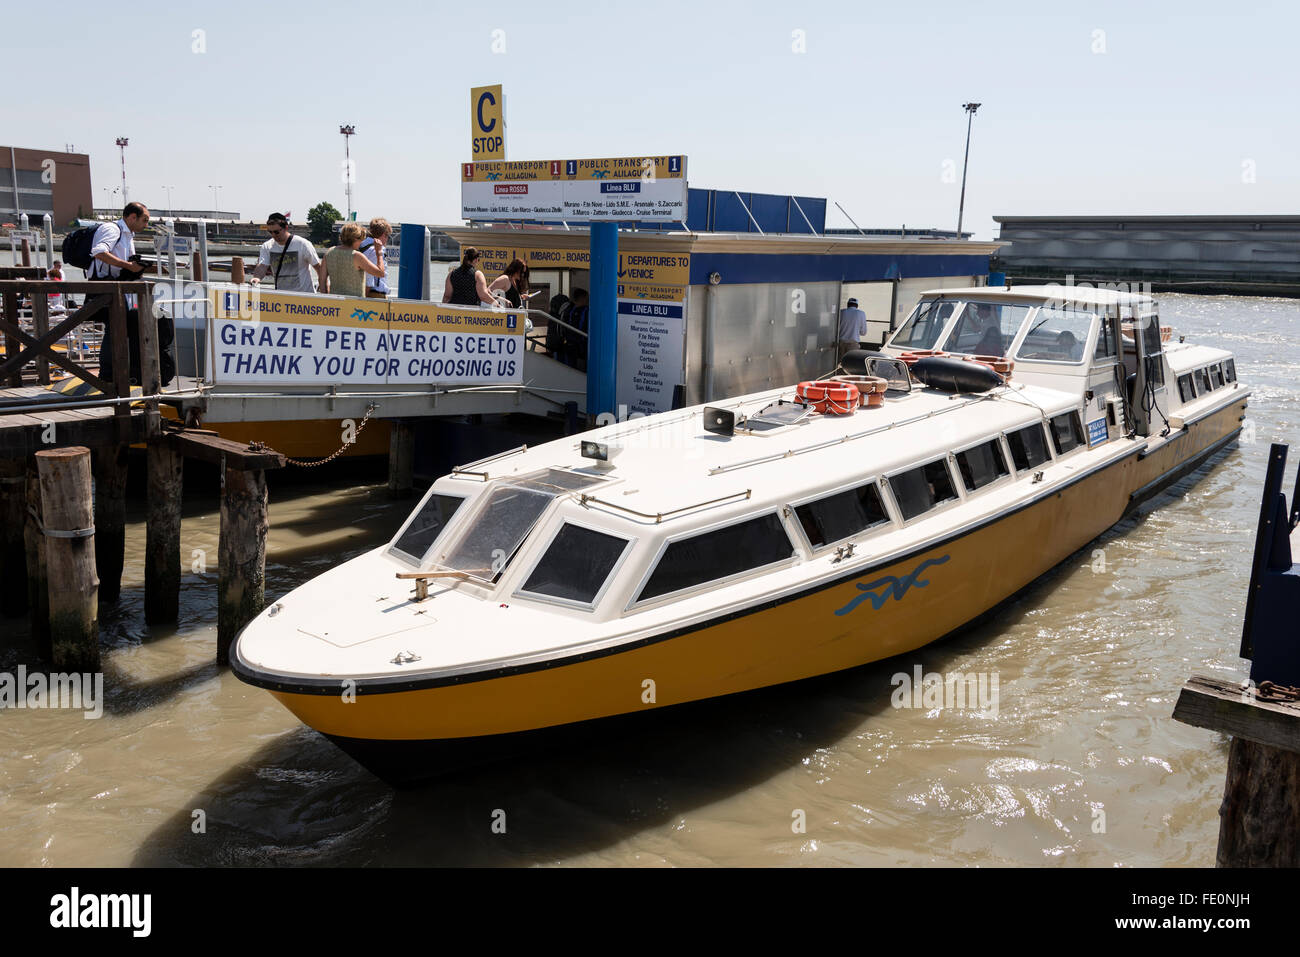 Visitors boarding a airport Vaporetto (water bus) that operate Stock Photo  - Alamy